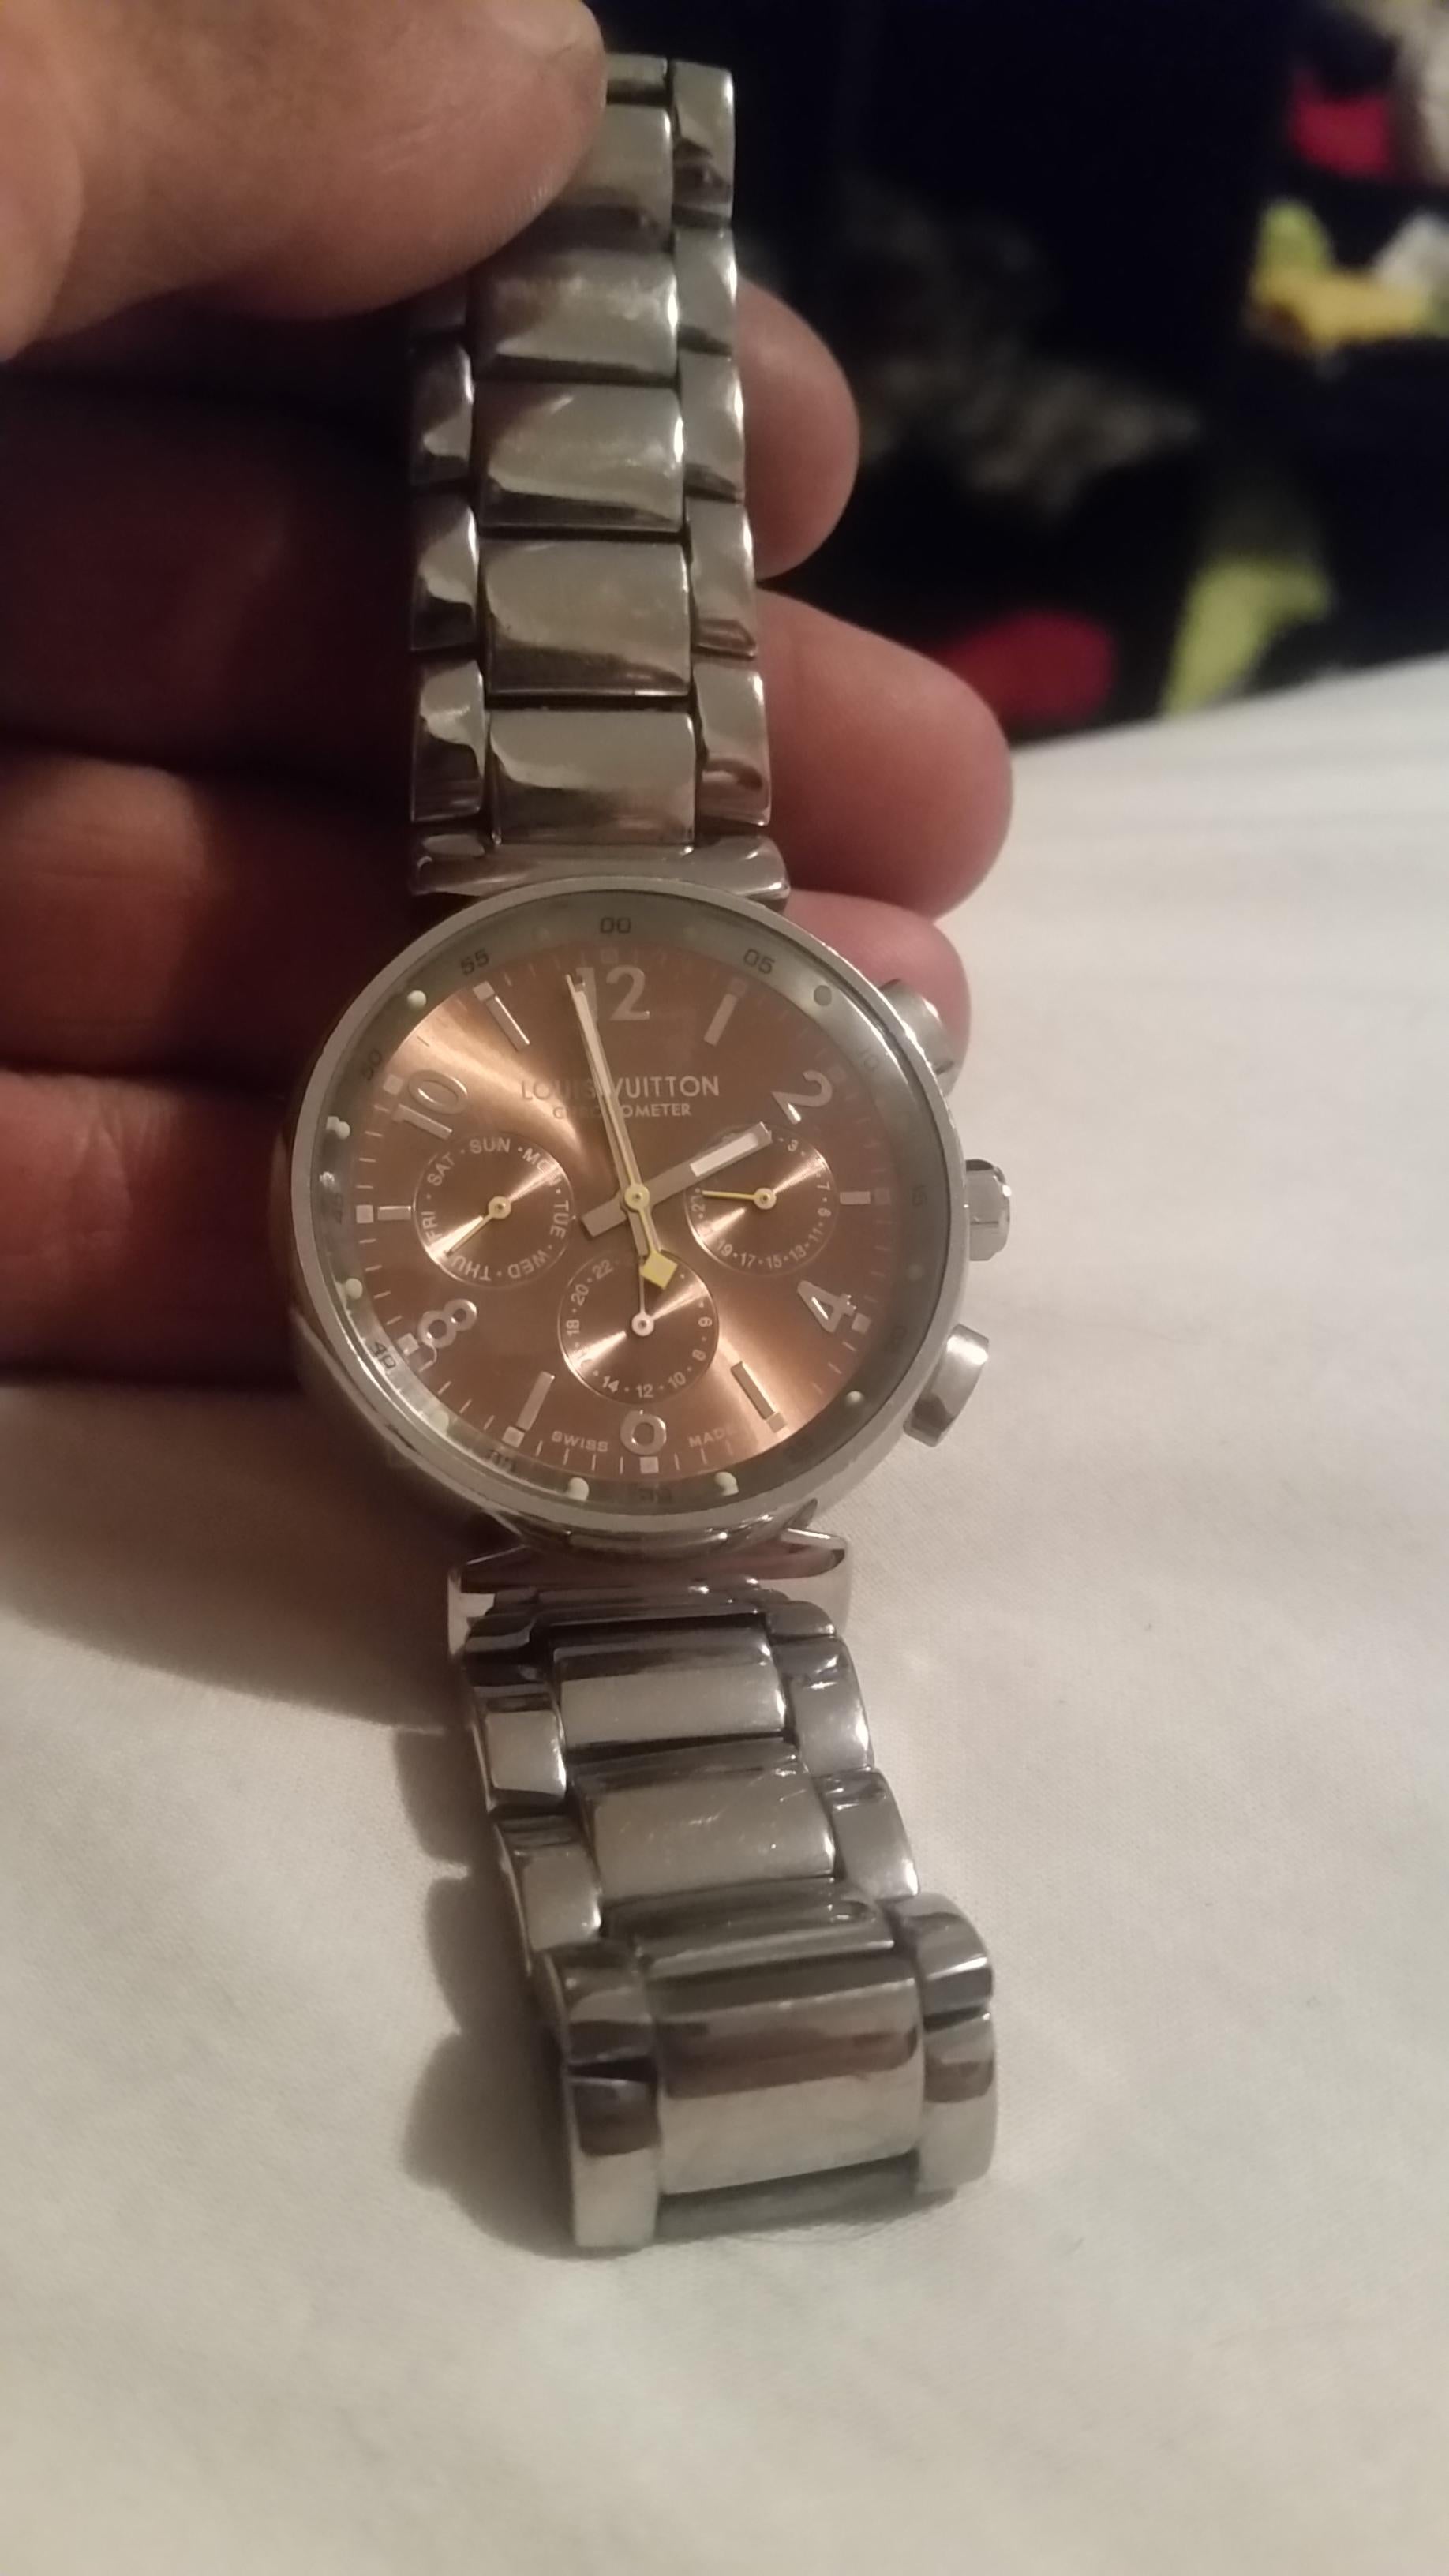 Louis Vuitton Chronometer] My dad gifted me this watch, I am not sure if it  is original or not and whether if it is valuable. Any ideas? : r/Watches